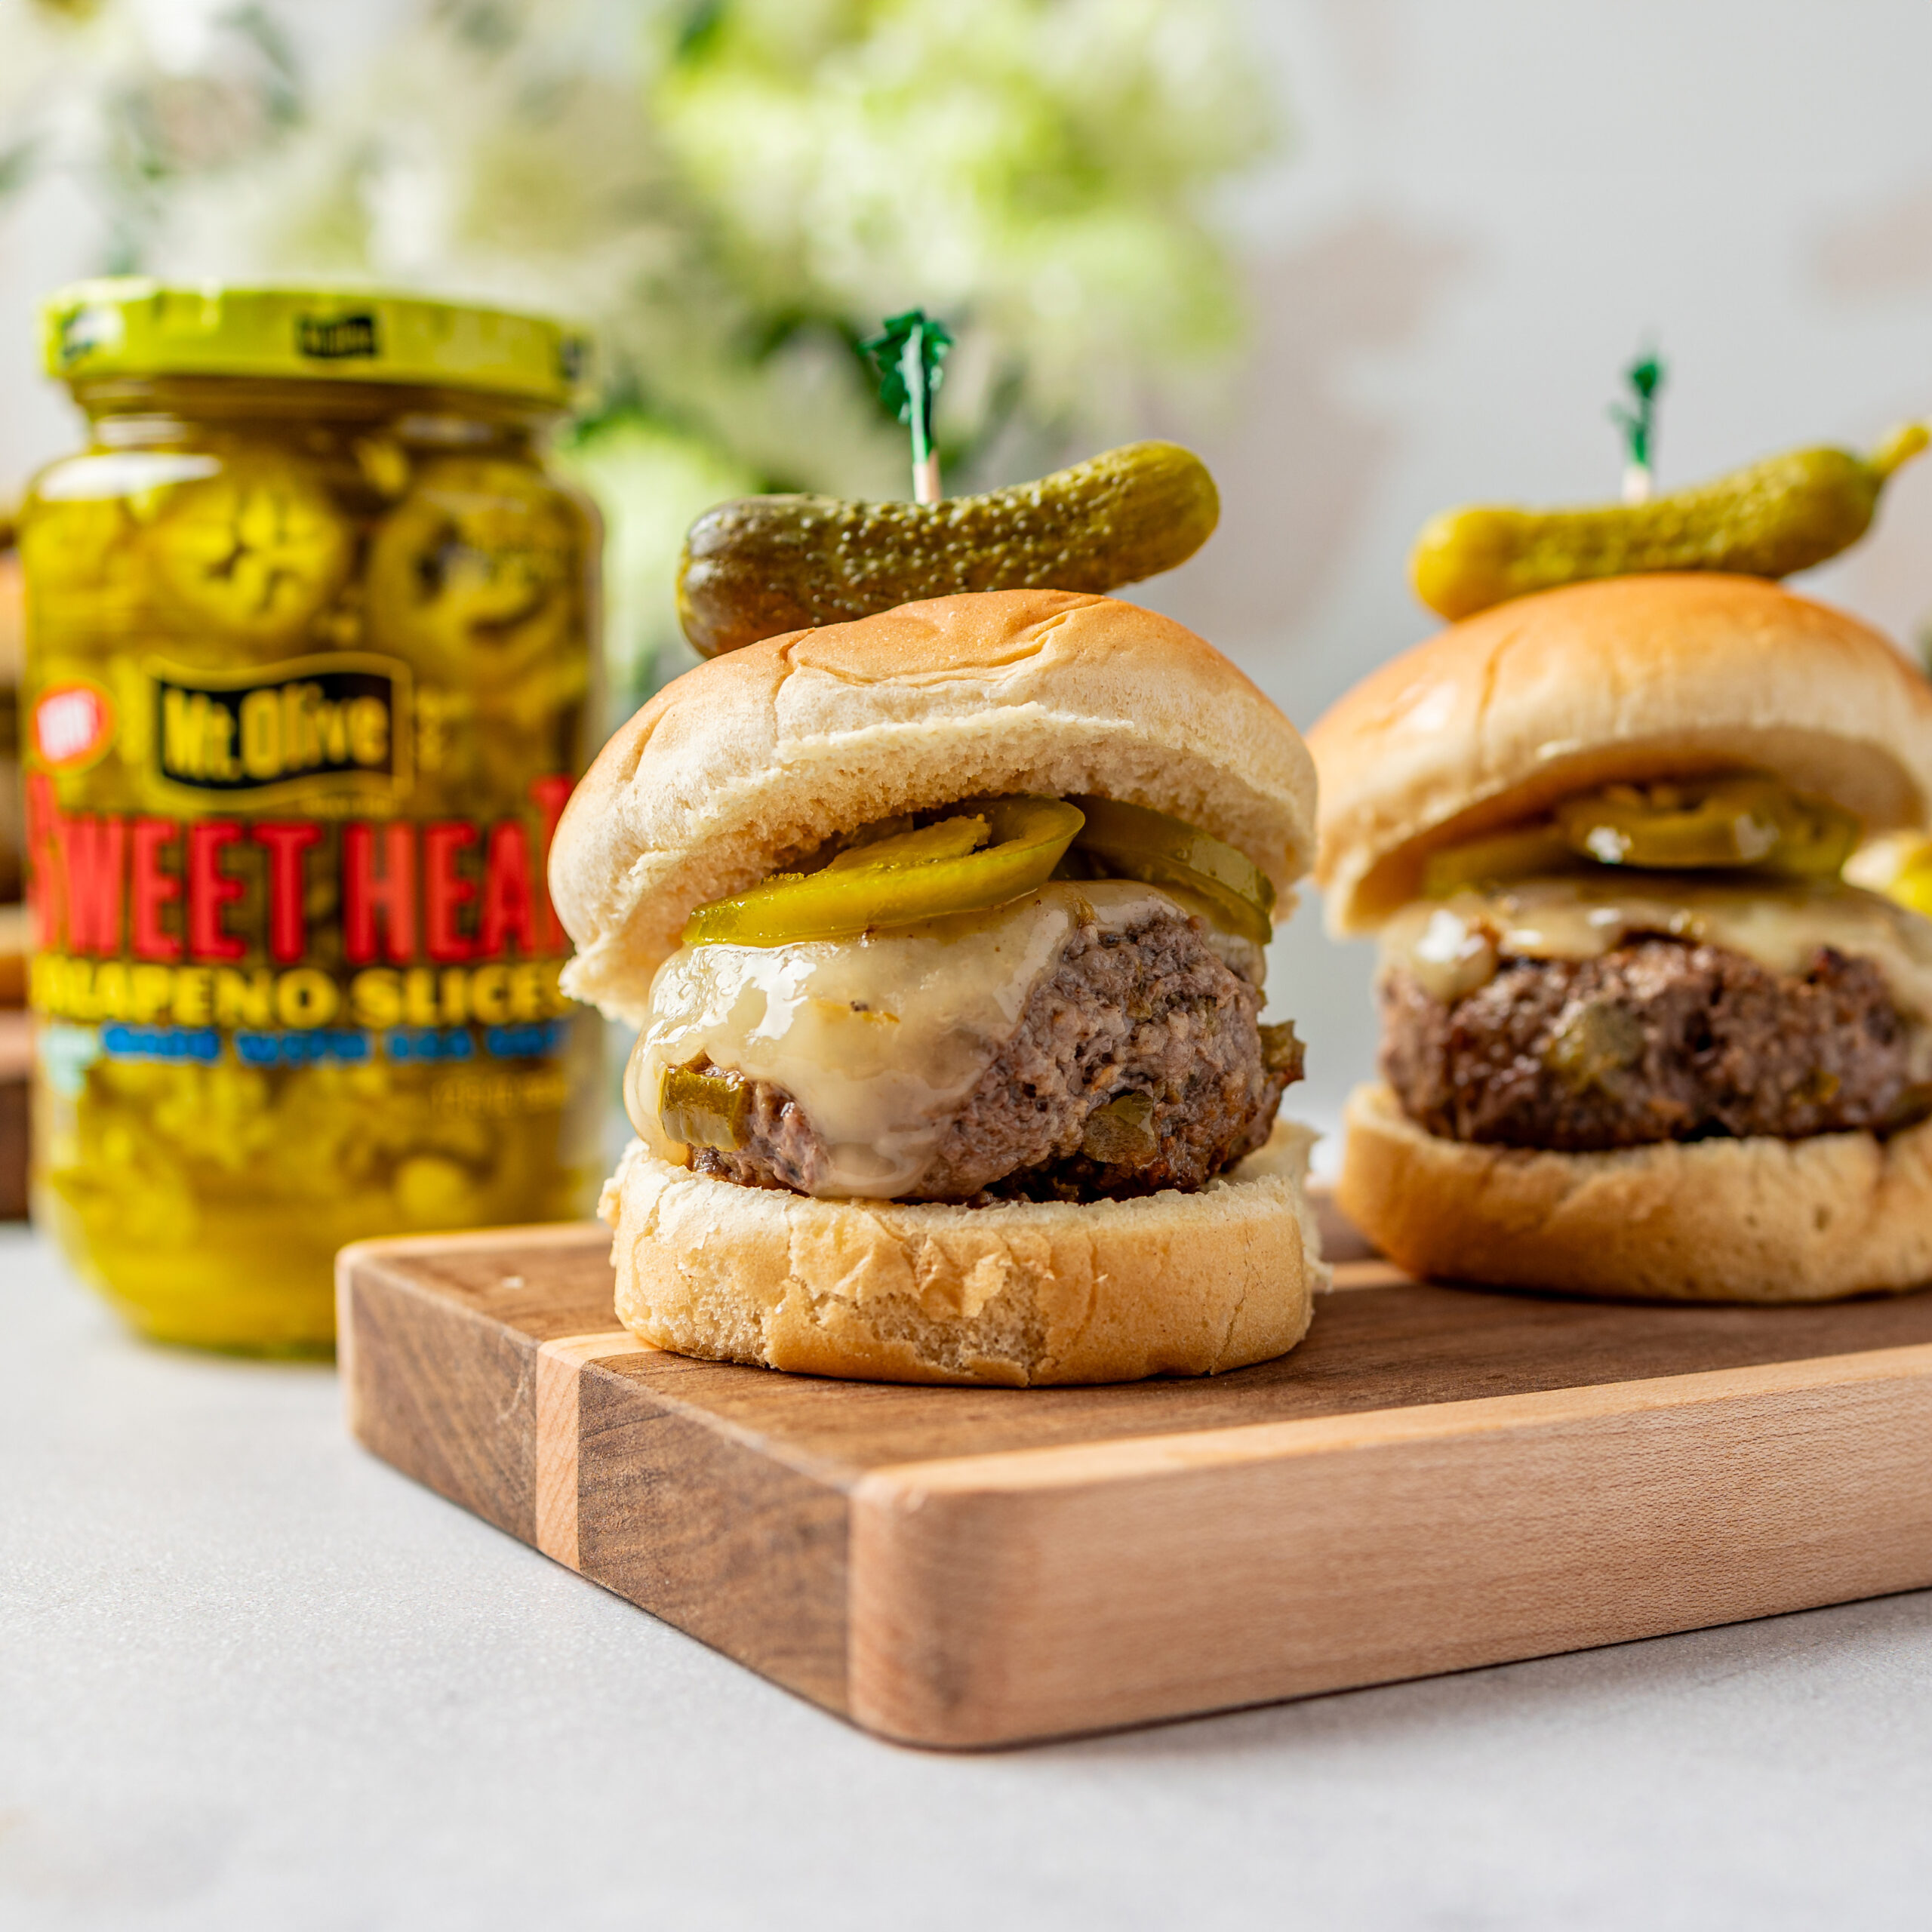 Two sliders (mini burgers) on a wood butcher block with melted cheese and jalapenos, topped with a baby dill pickle. Jar of sweet heat jalapenos behind in background